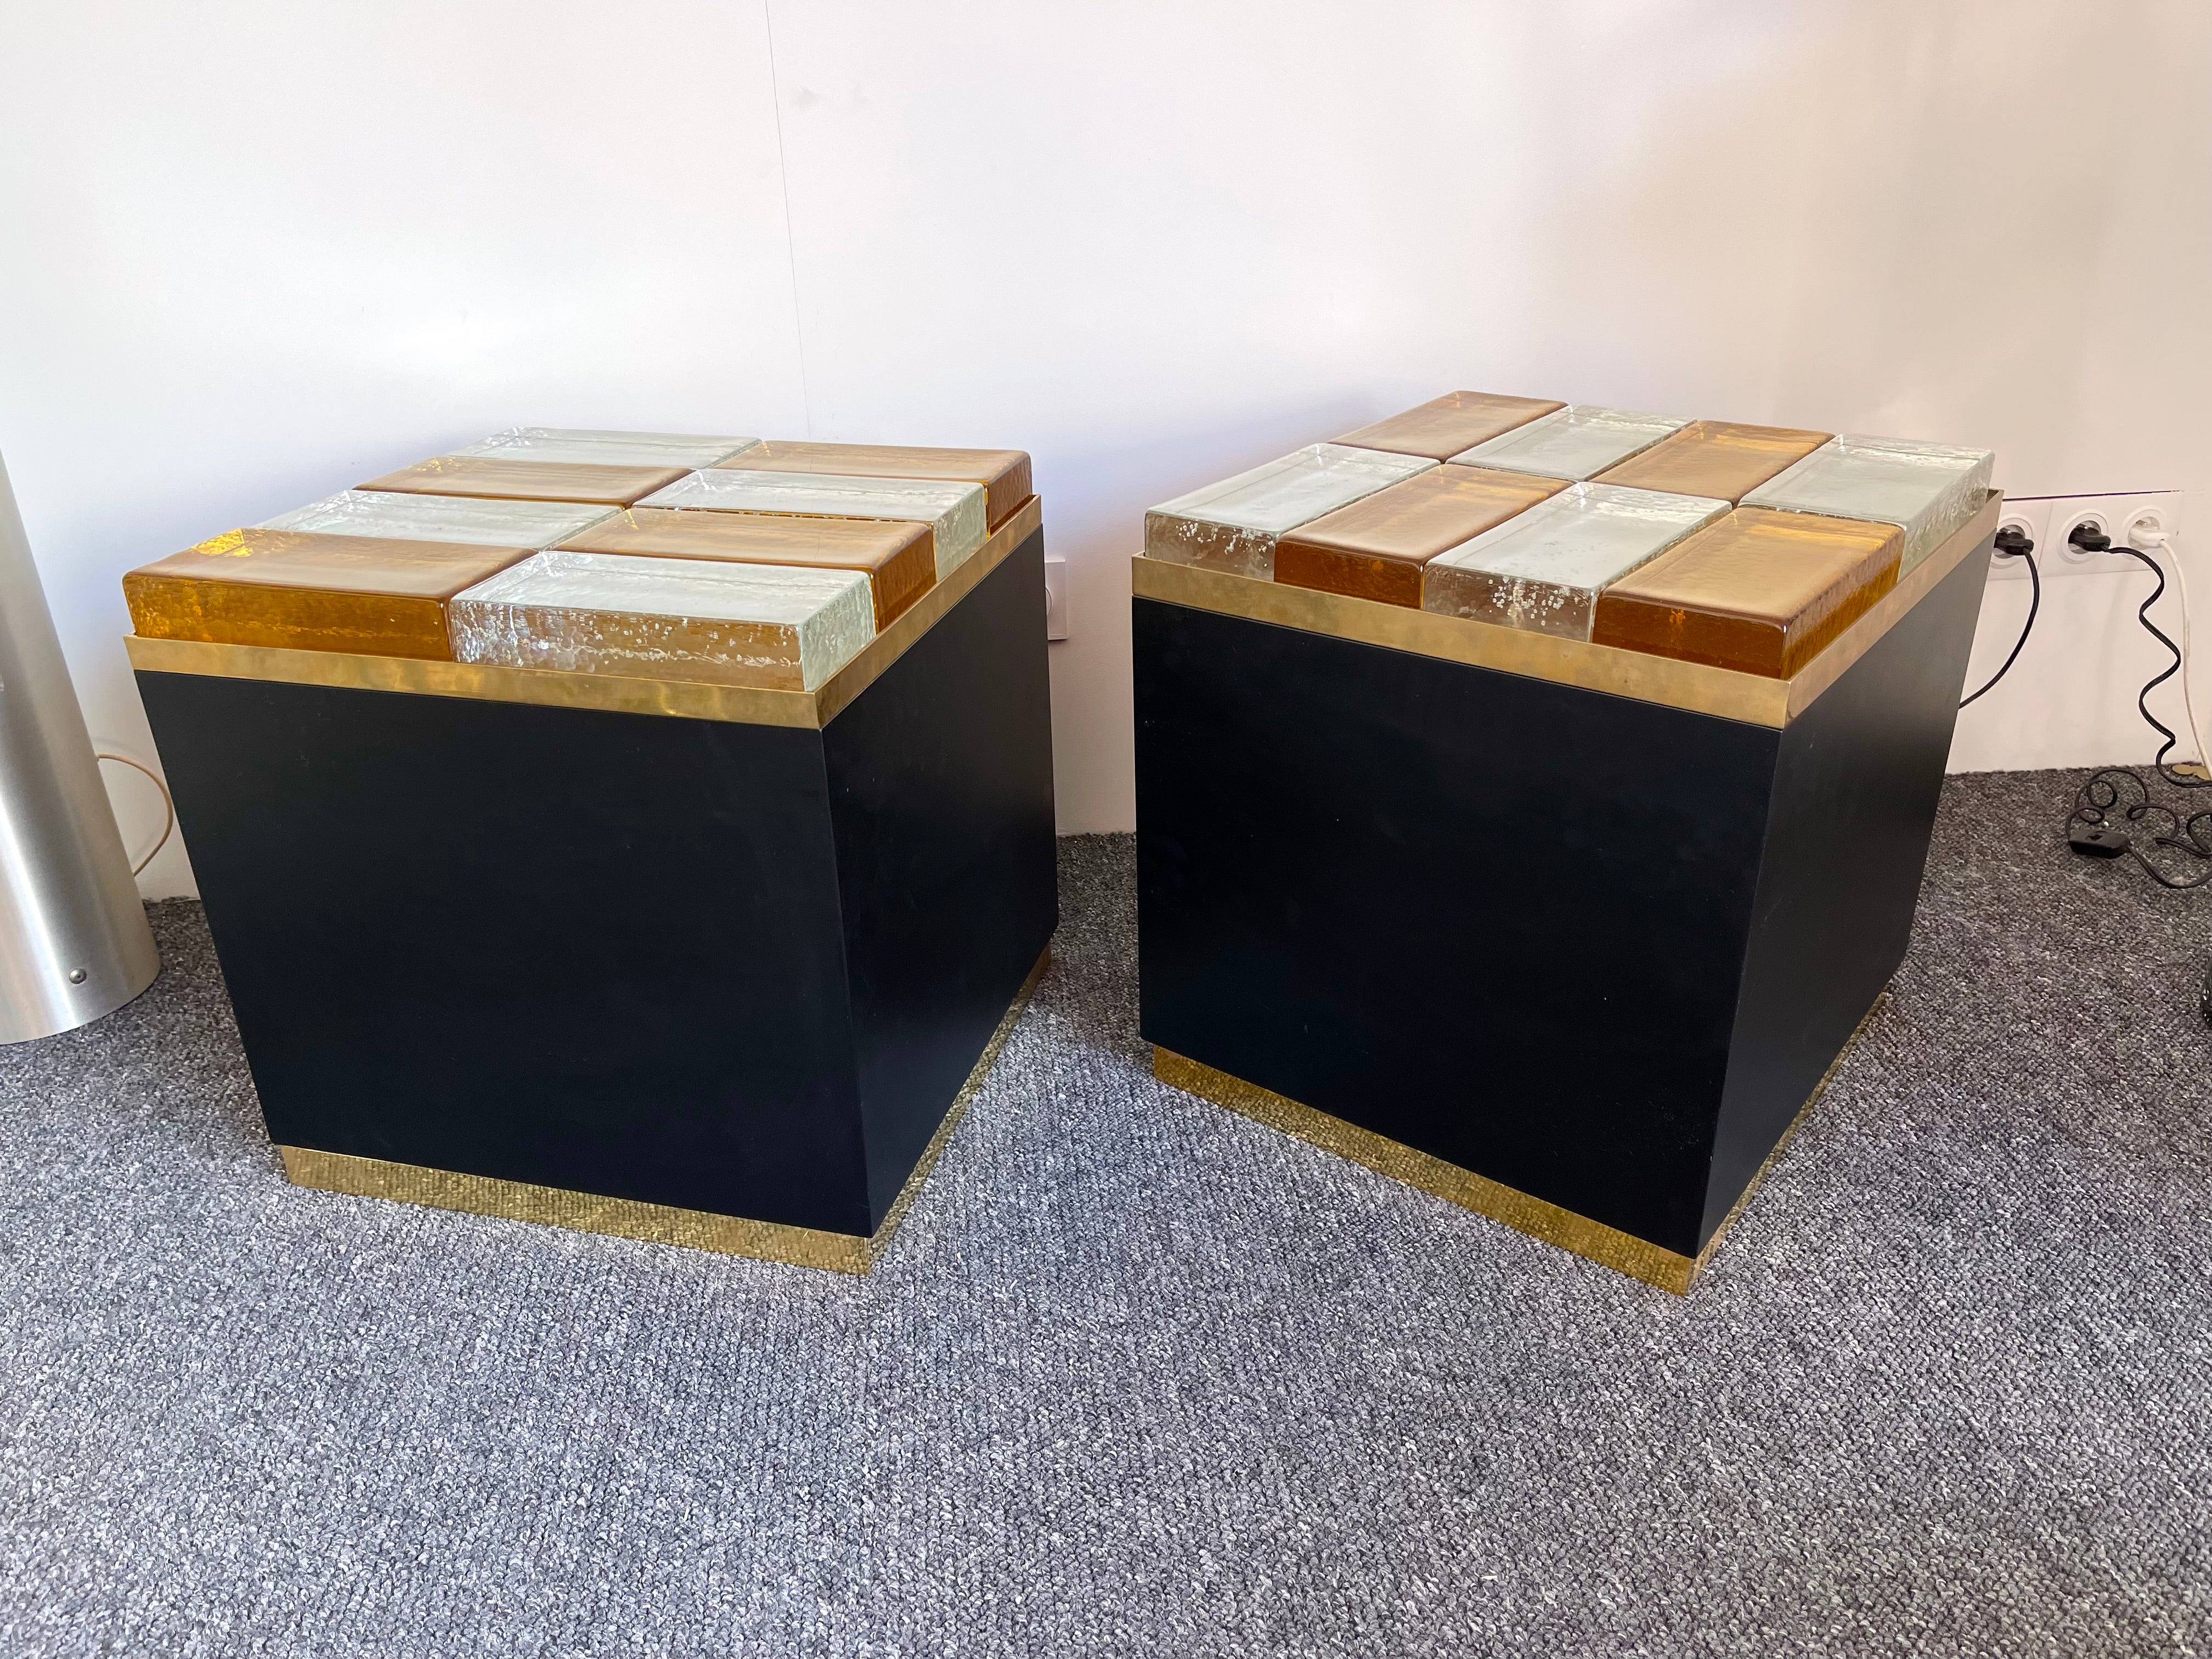 Pair of lightning light lamp side end low coffee cocktail bedside tables or nightstands in black mat lacquered wood, brass and massive block brick of yellow and clear bubble Murano glass. Contemporary work by a small artisanal Italian design